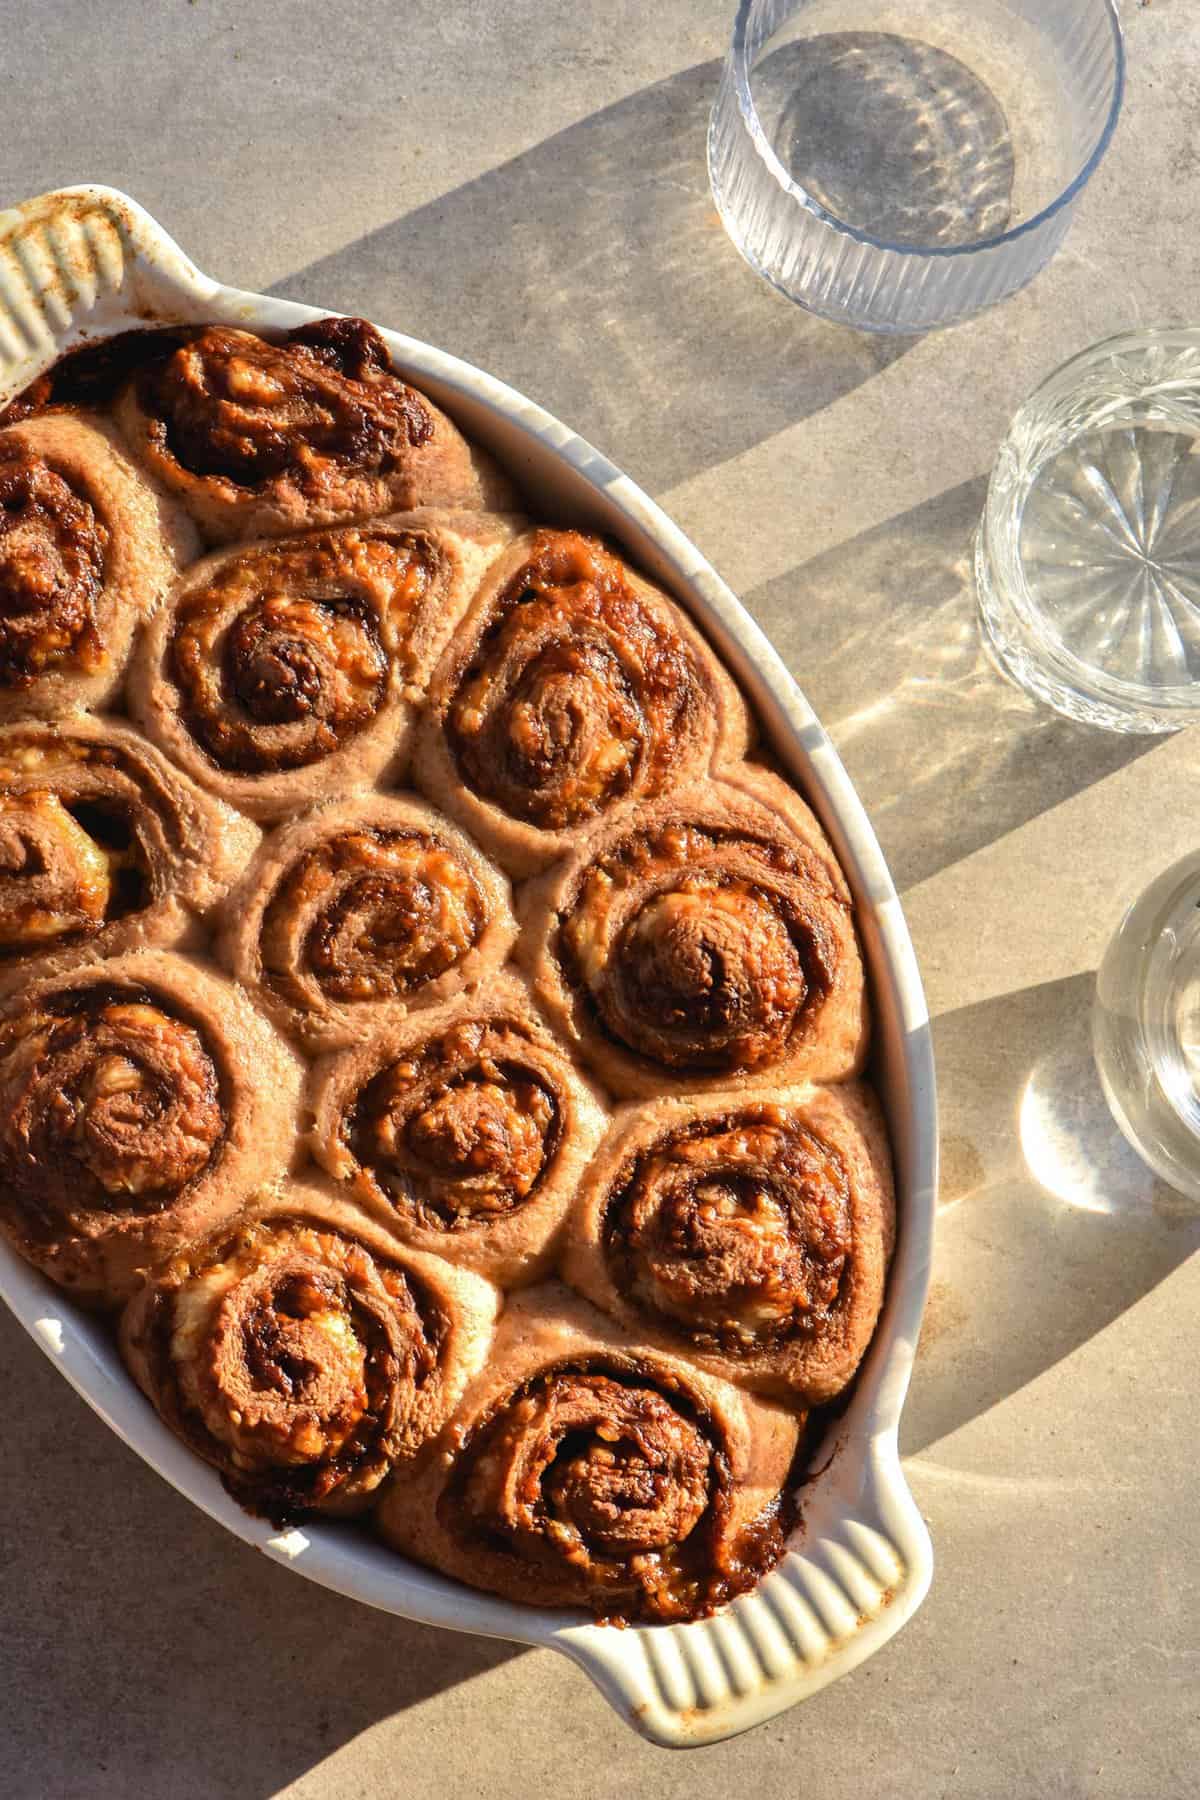 An aerial view of gluten free sourdough vegemite scrolls in harsh sunlight. Water glasses sit to the right of the image and create filtered light